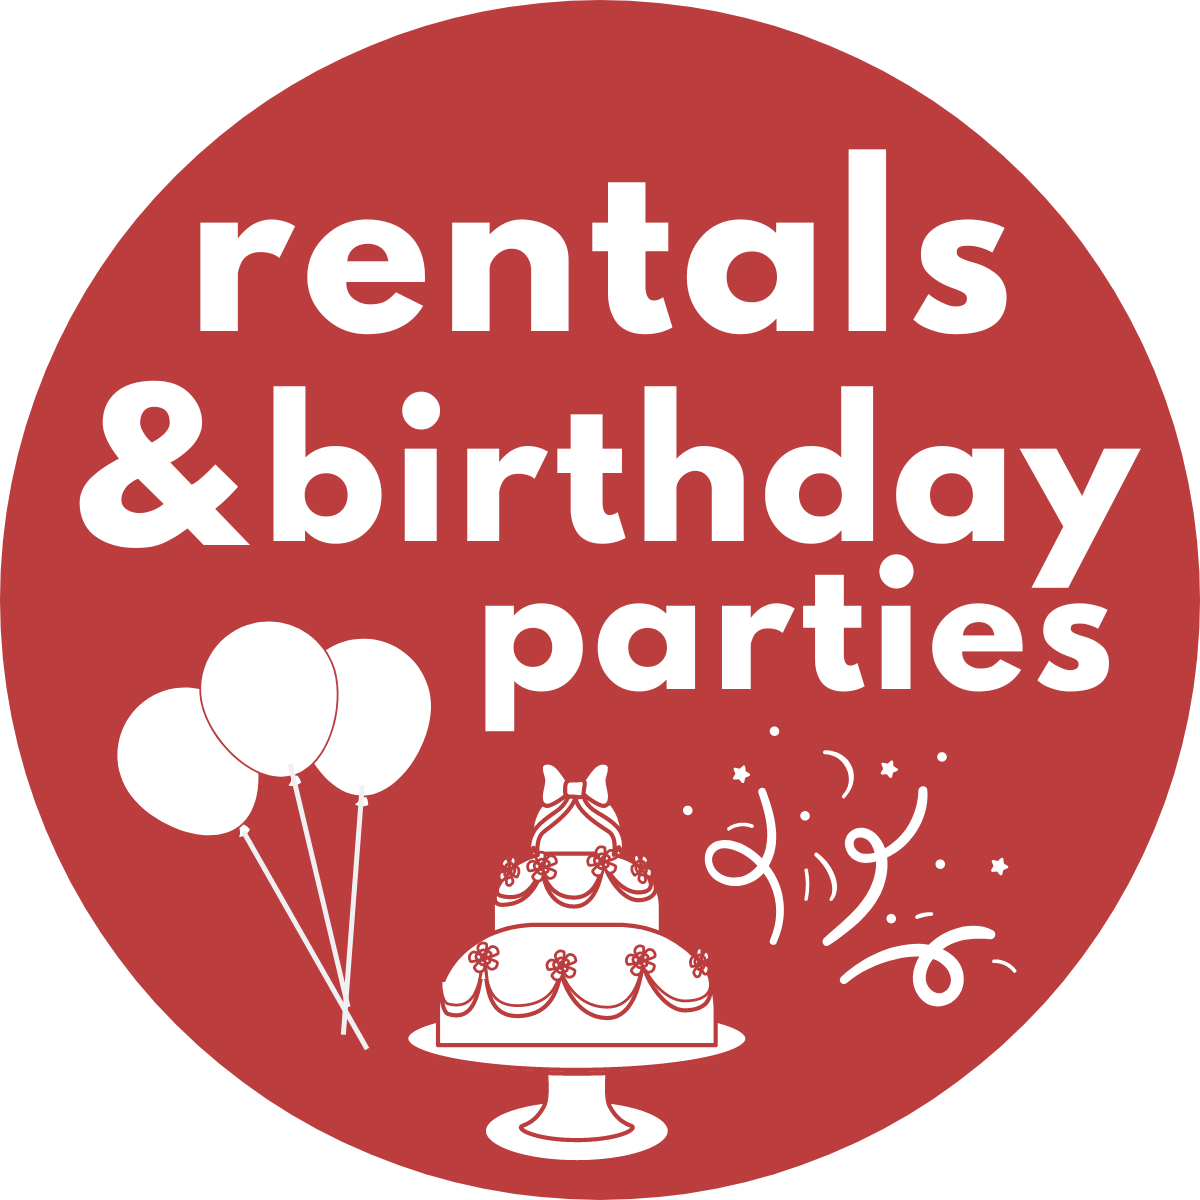 web buttons_birthday parties.png